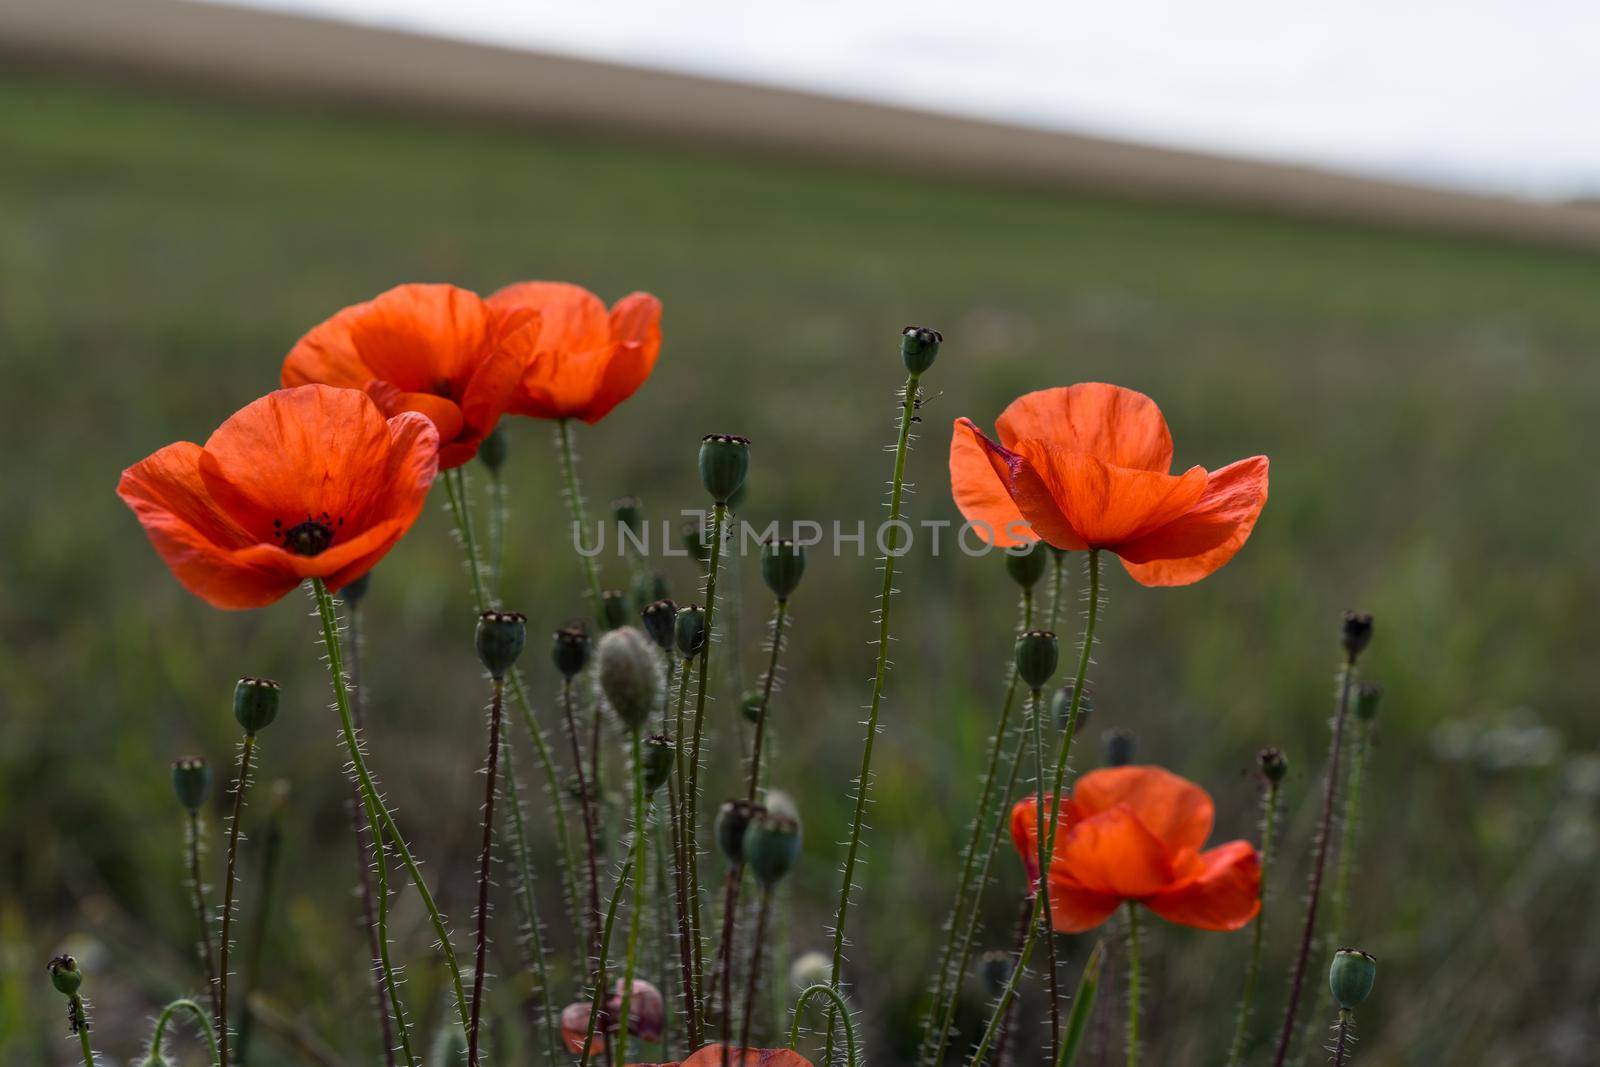 Poppy flower. A field of poppy flowers blossoming during spring against a landscape with shallow depth of field by LeoniekvanderVliet